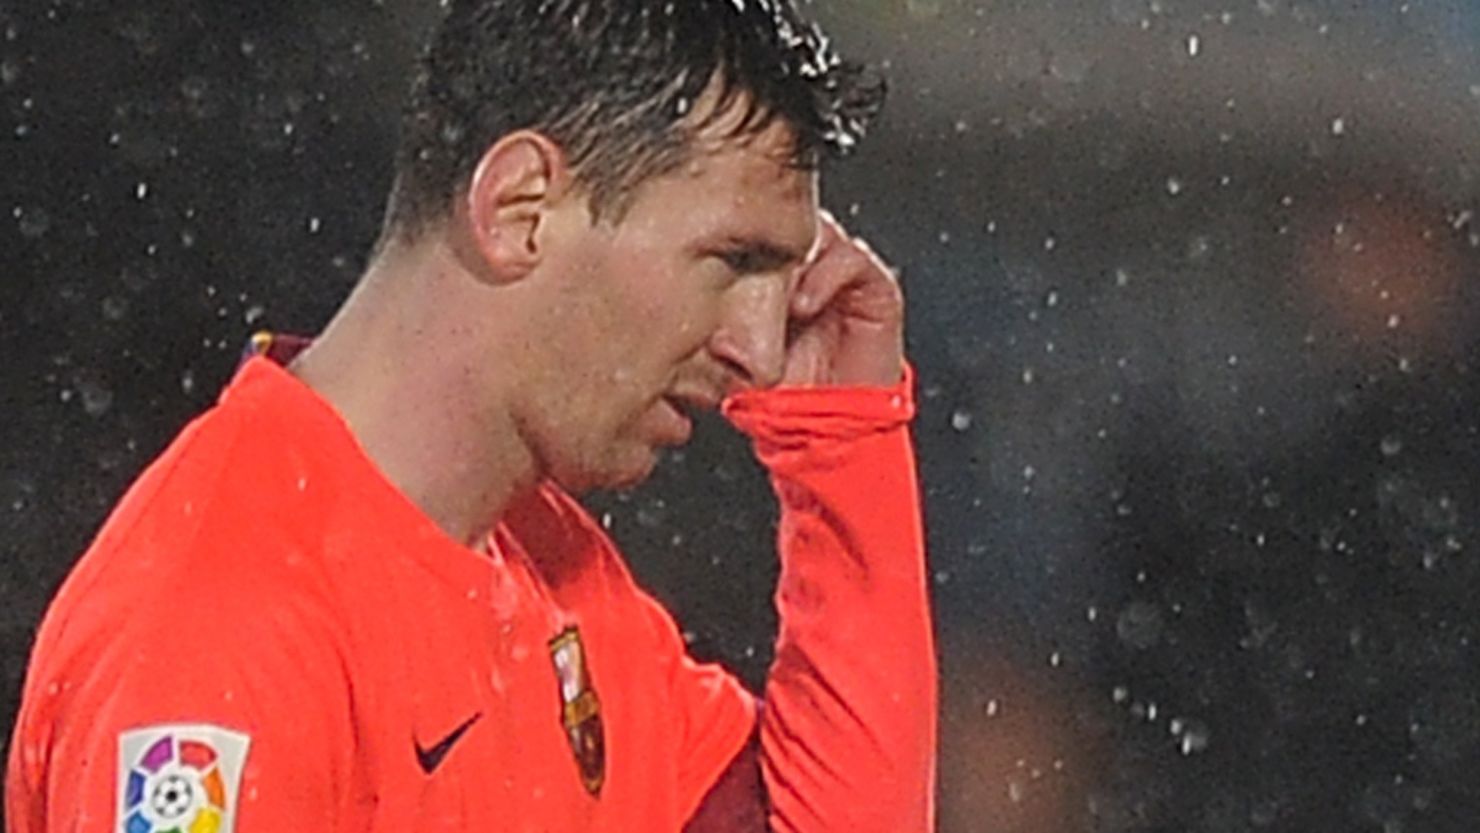 A disconsolate Lionel Messi leaves the pitch after Barcelona was held goalless by Getafe in La Liga.